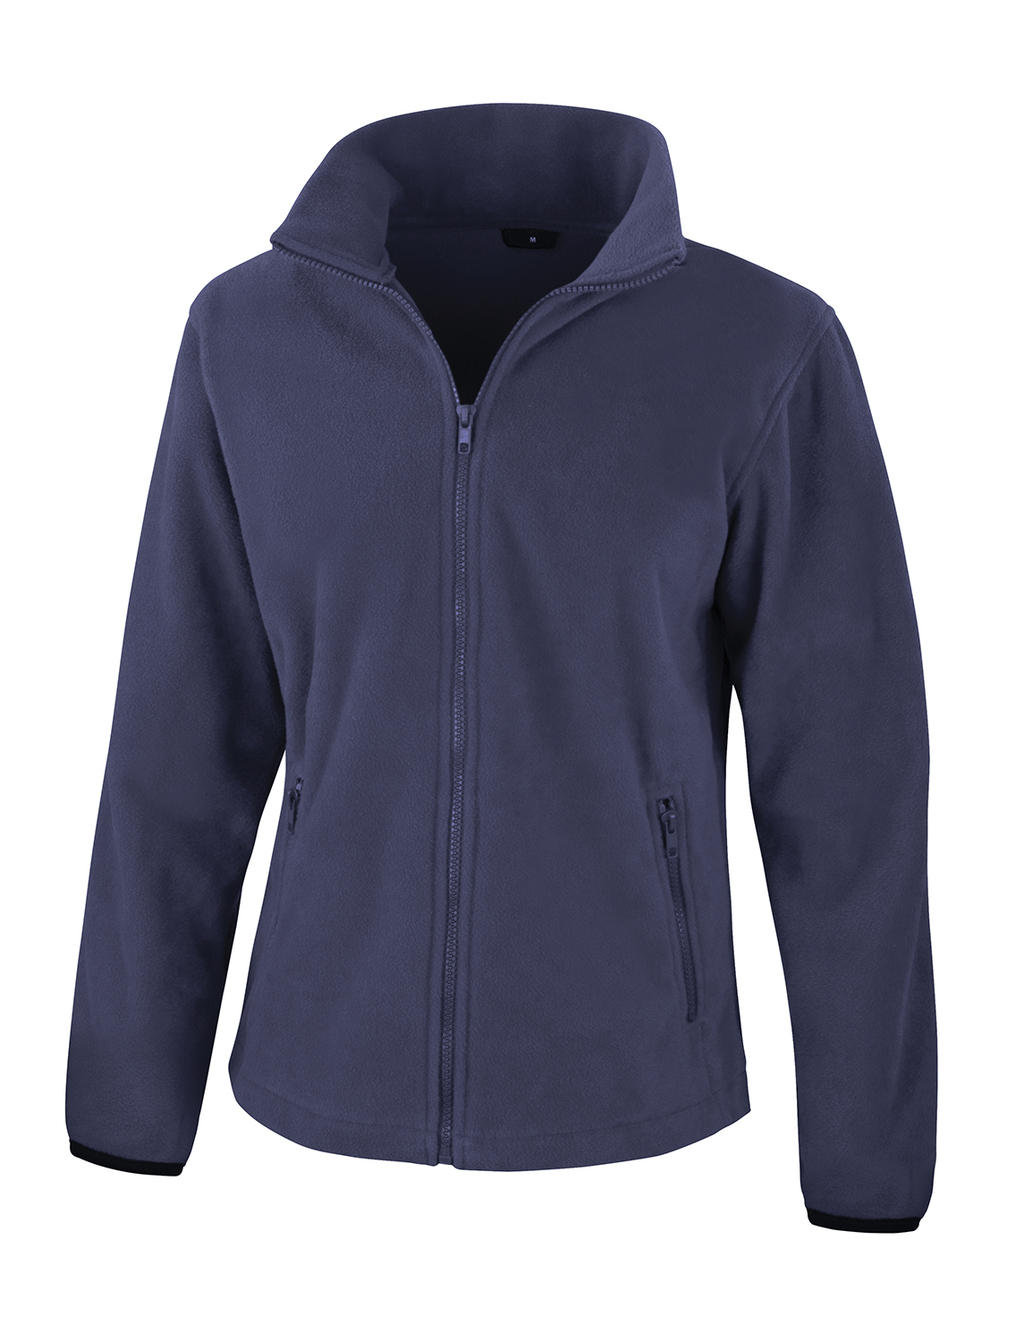  Womens Fashion Fit Outdoor Fleece in Farbe Navy